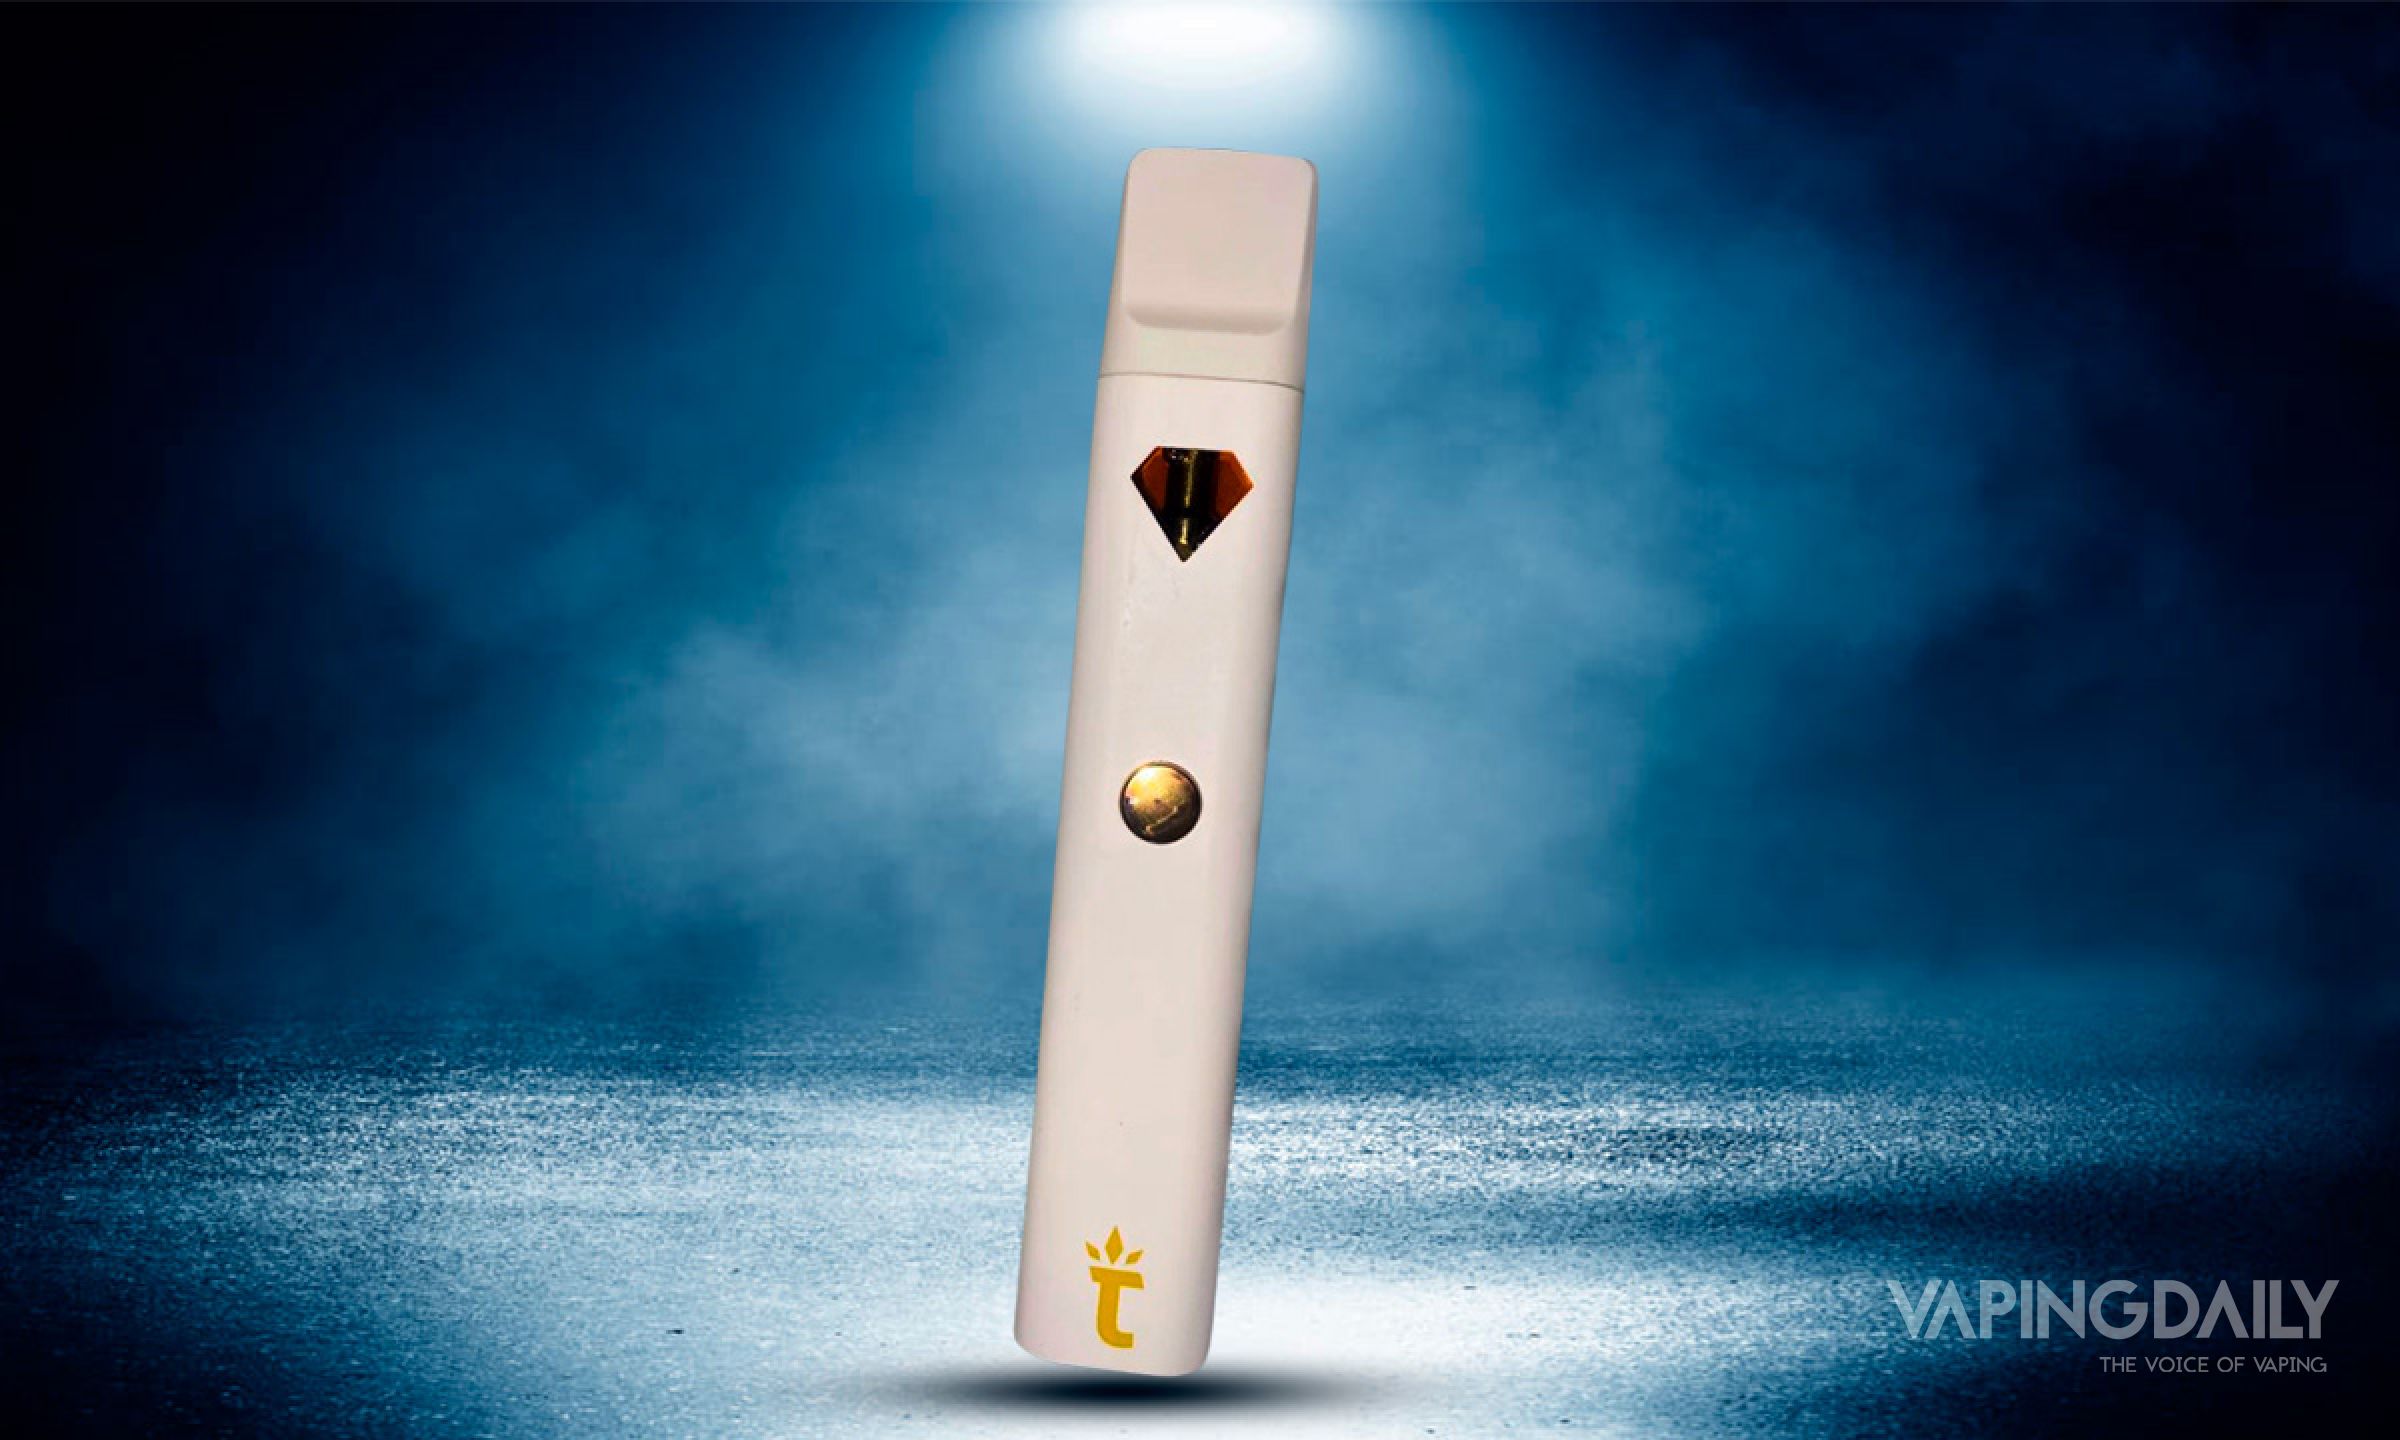 Torch Diamond Vape Review: This Torch Lights the Way